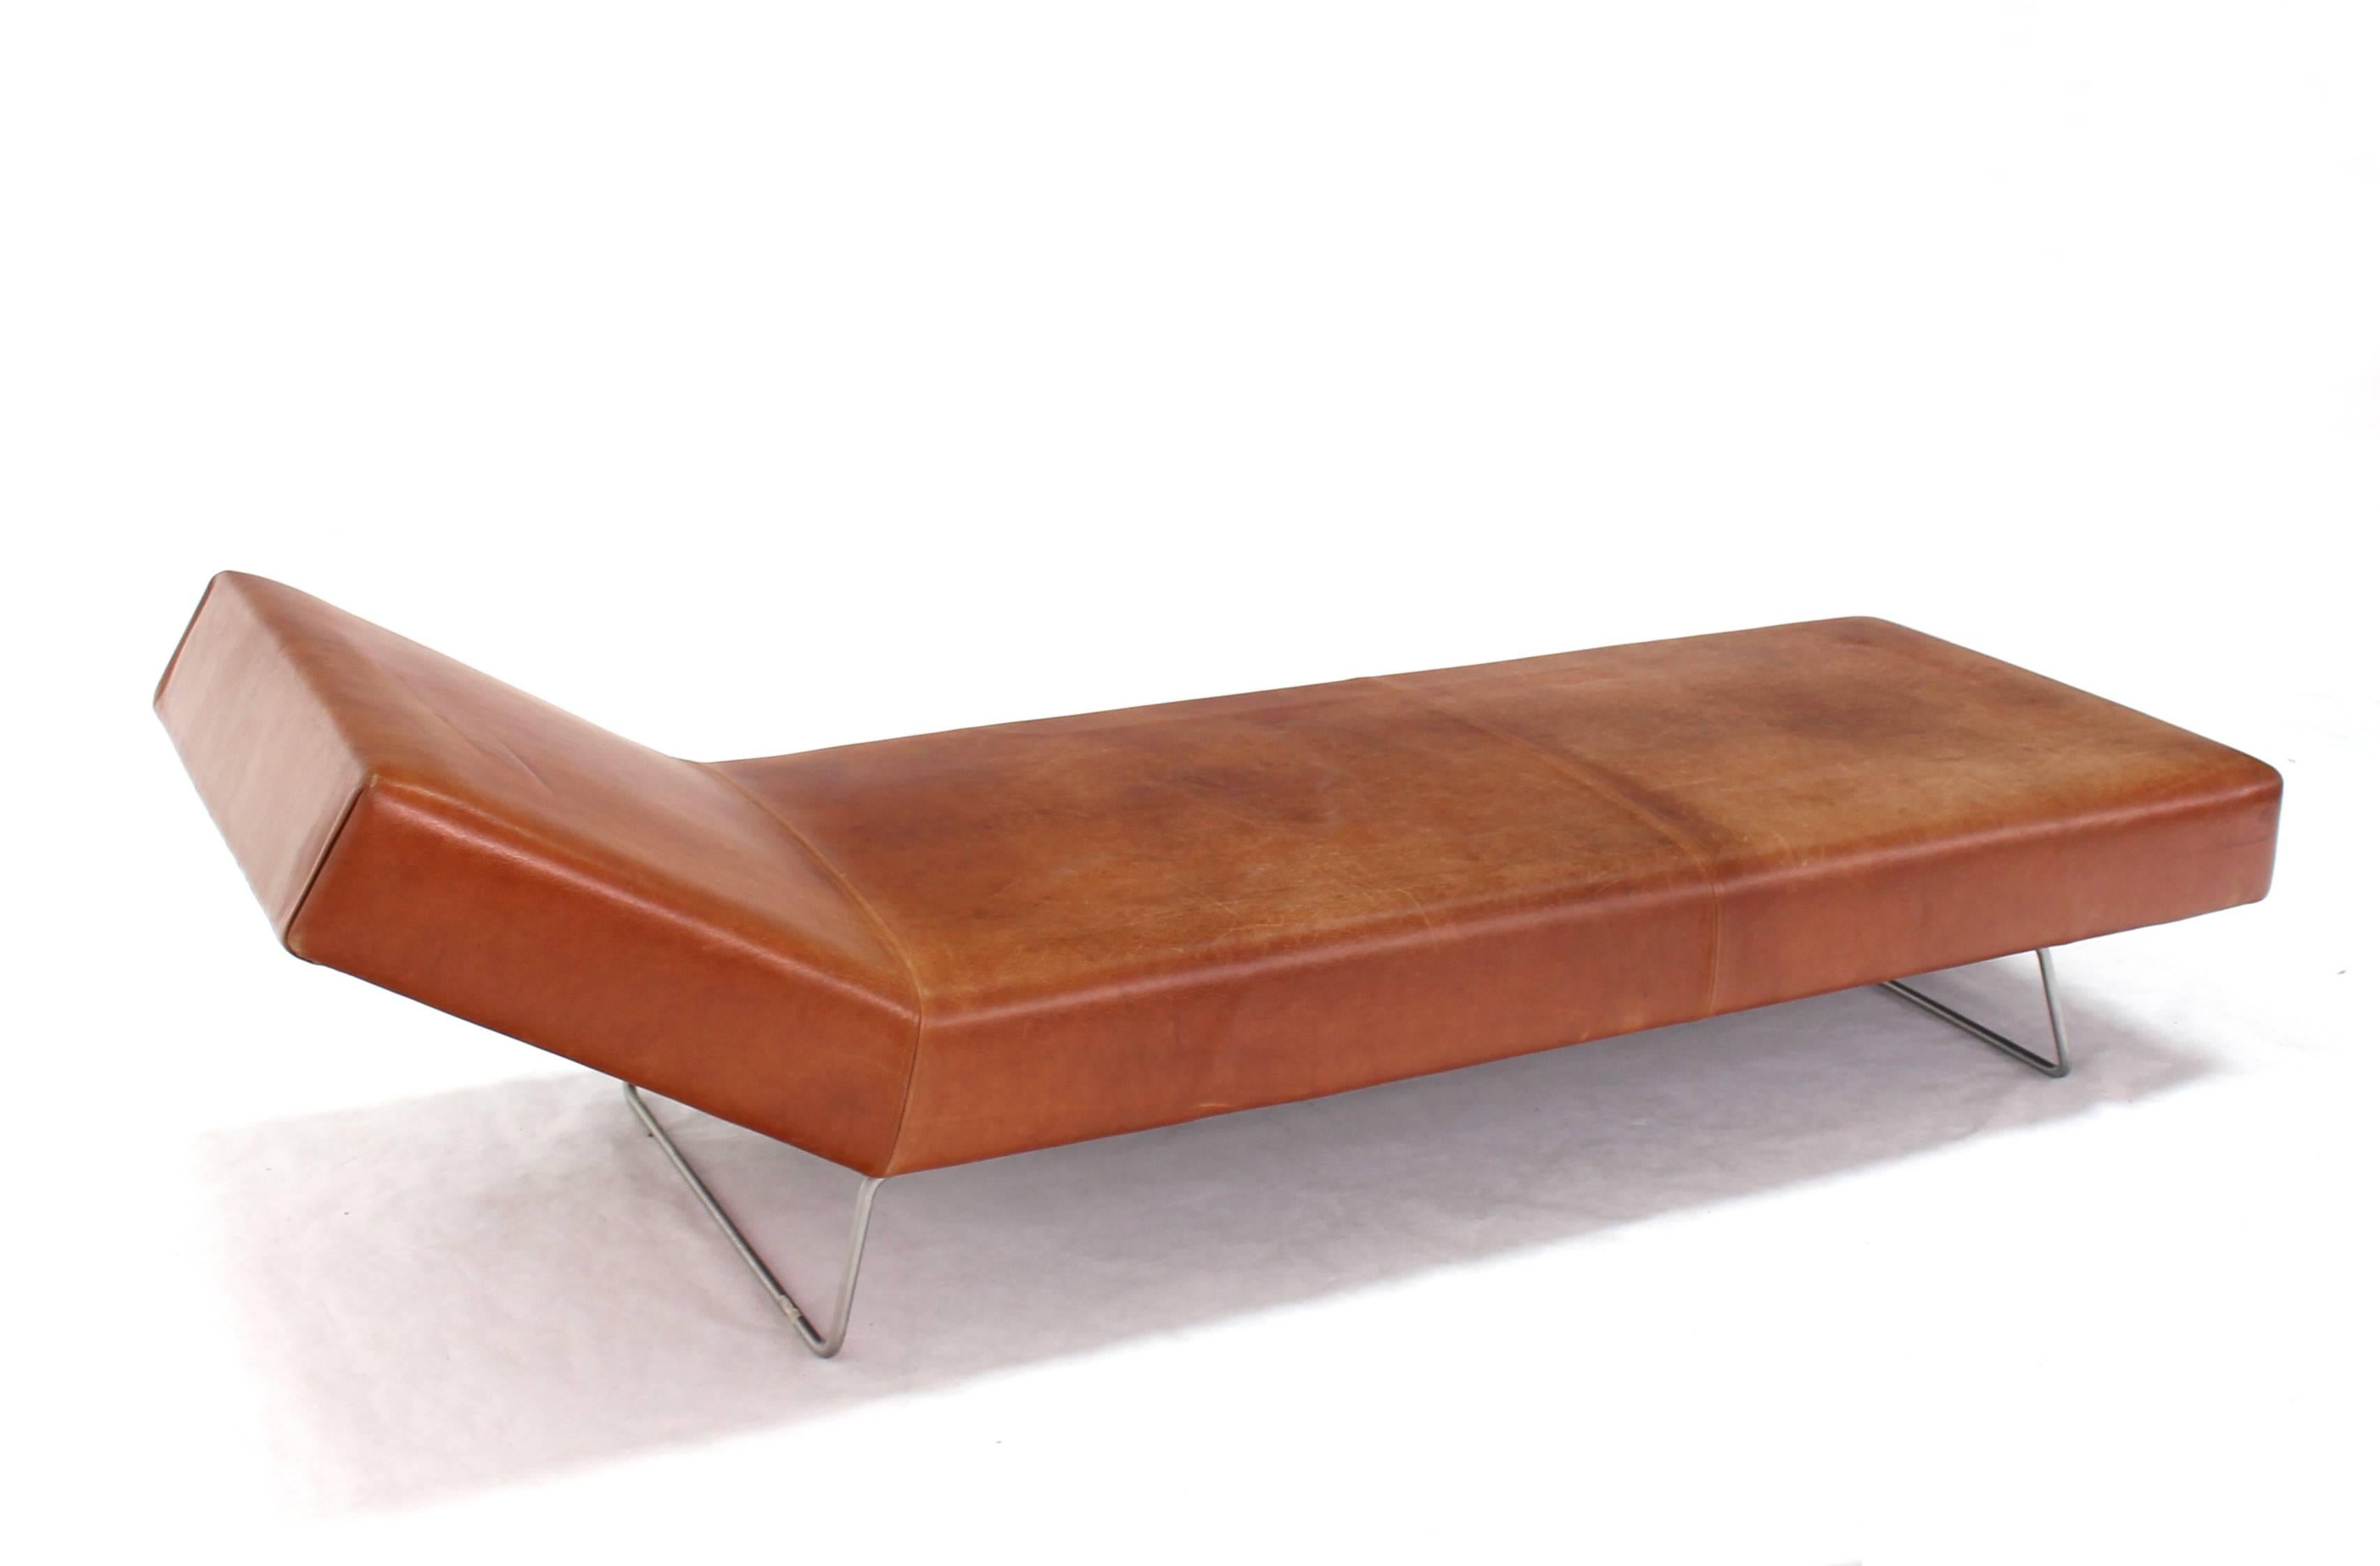 American Brown Leather Chaise Lounge Daybed